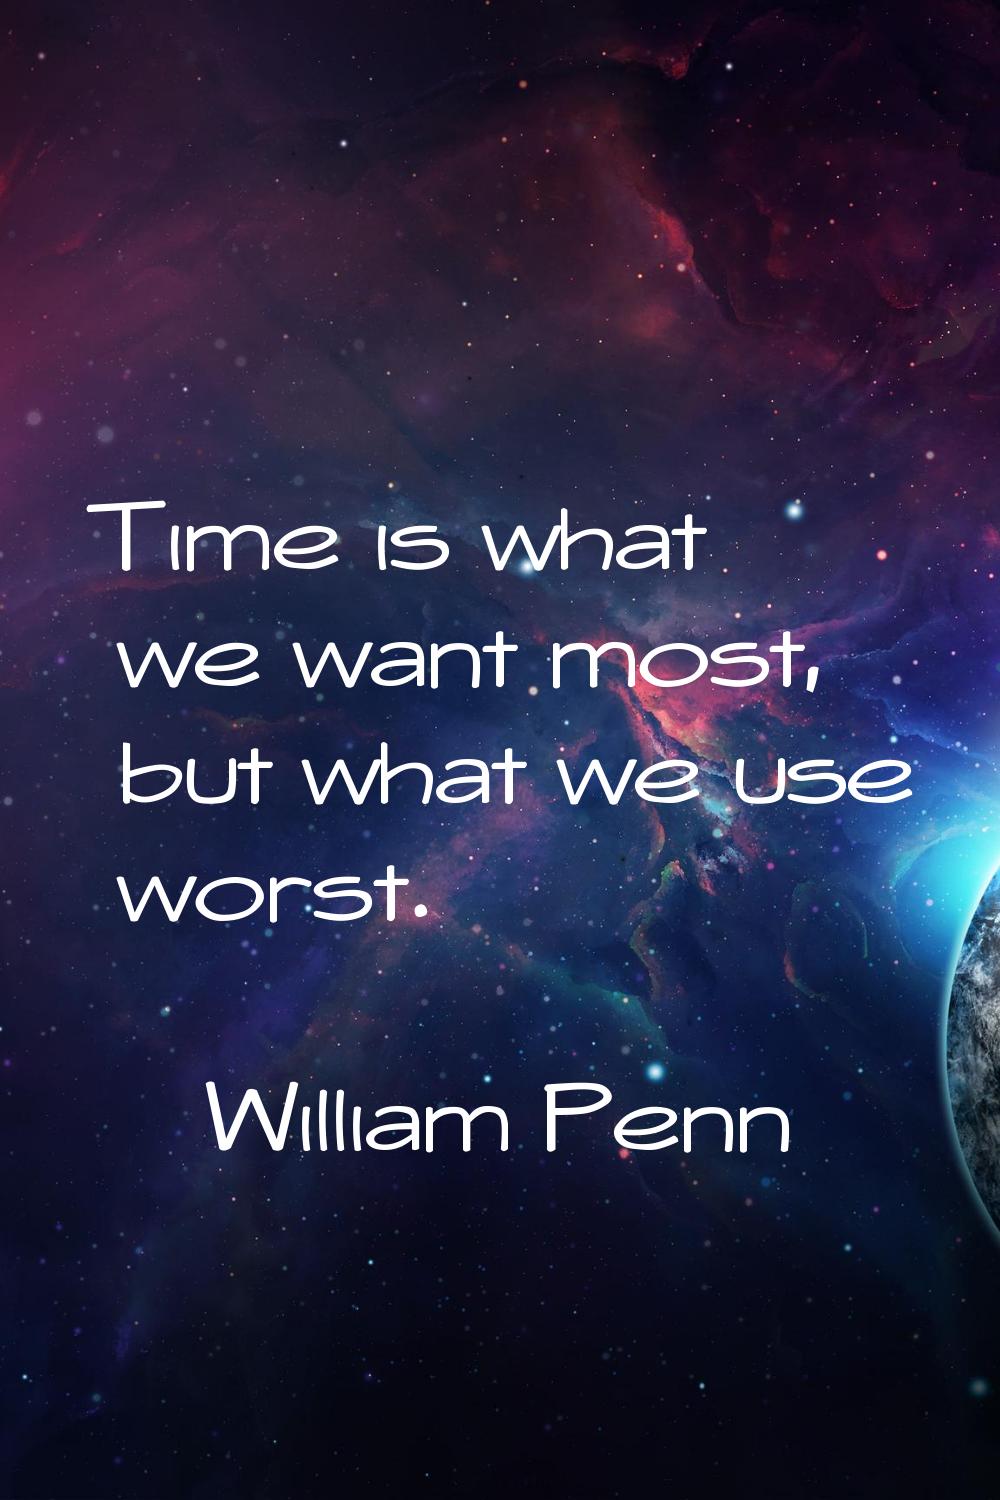 Time is what we want most, but what we use worst.